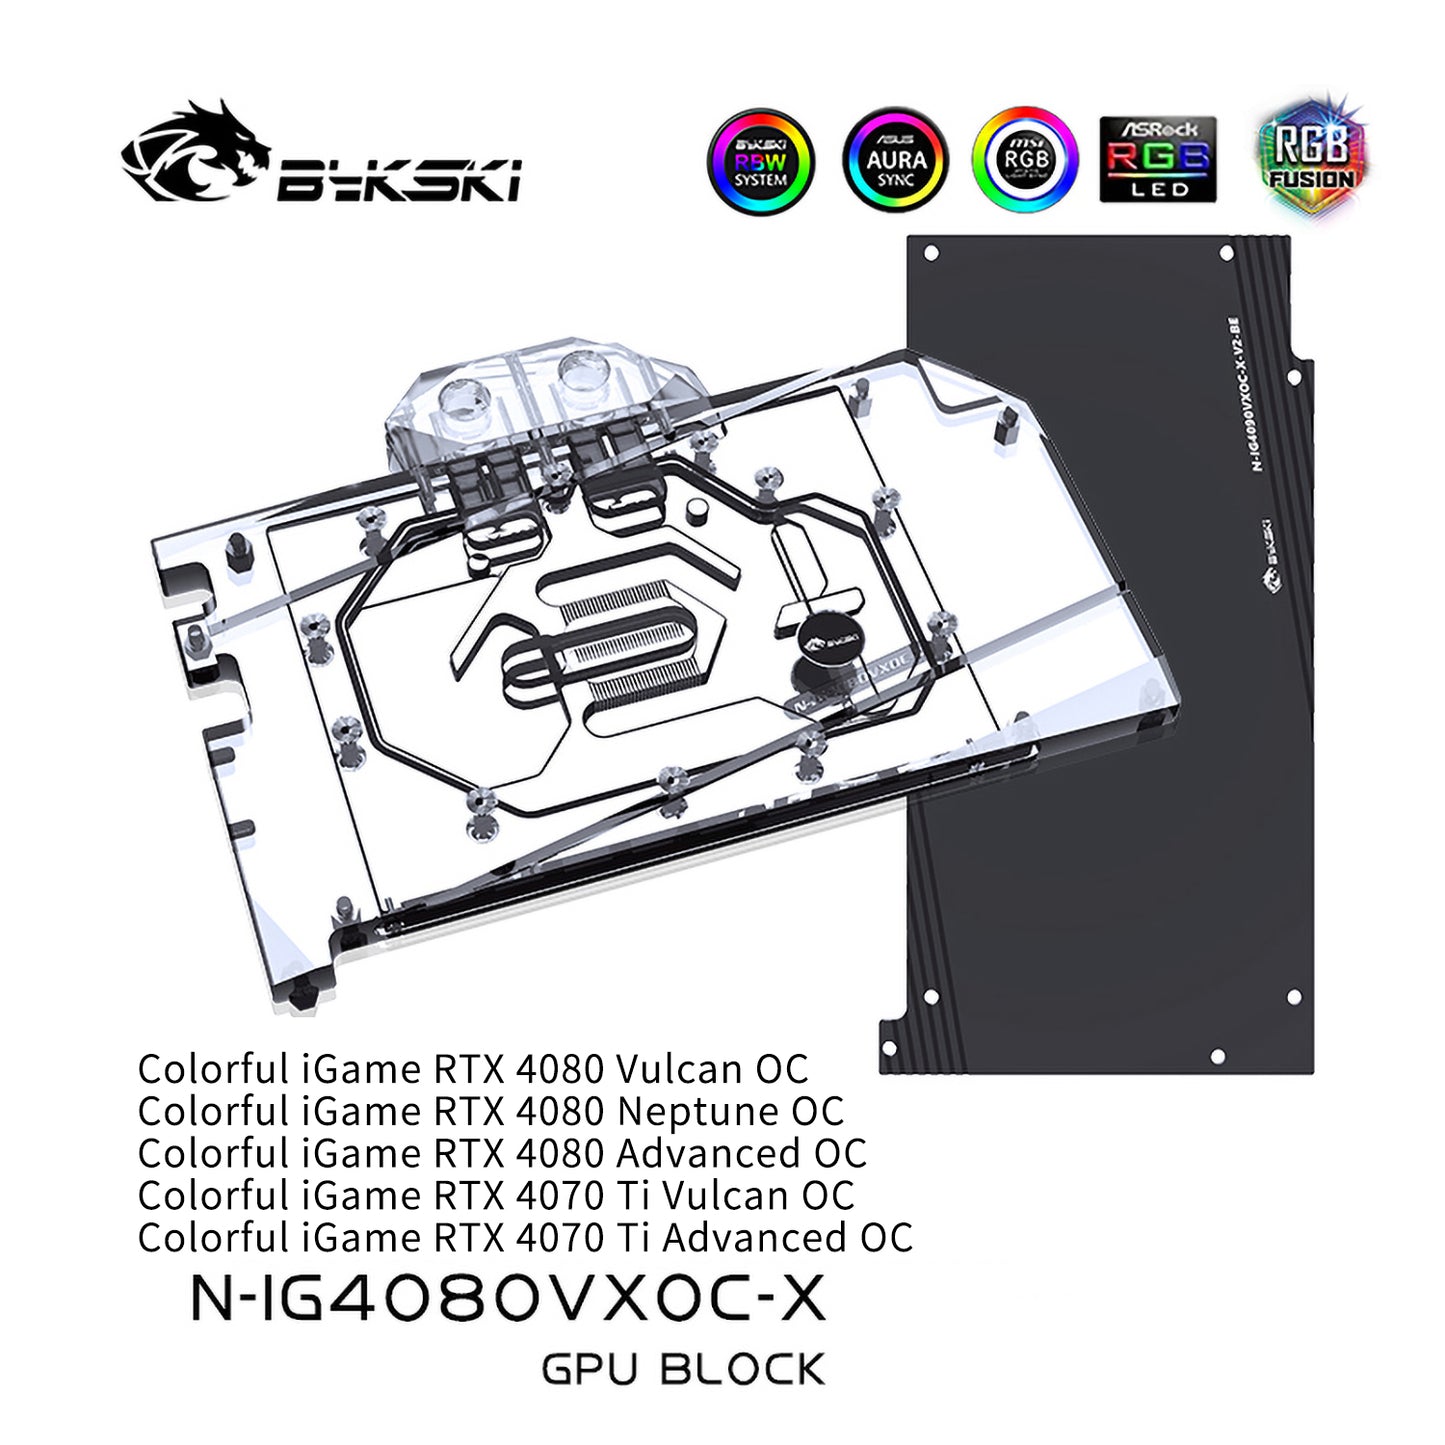 Bykski GPU Water Block For Colorful iGame RTX 4080 Vulcan / Neptune / Advanced / 4070 Ti Vulcan / Advanced, Full Cover With Backplate PC Water Cooling Cooler, N-IG4080VXOC-X